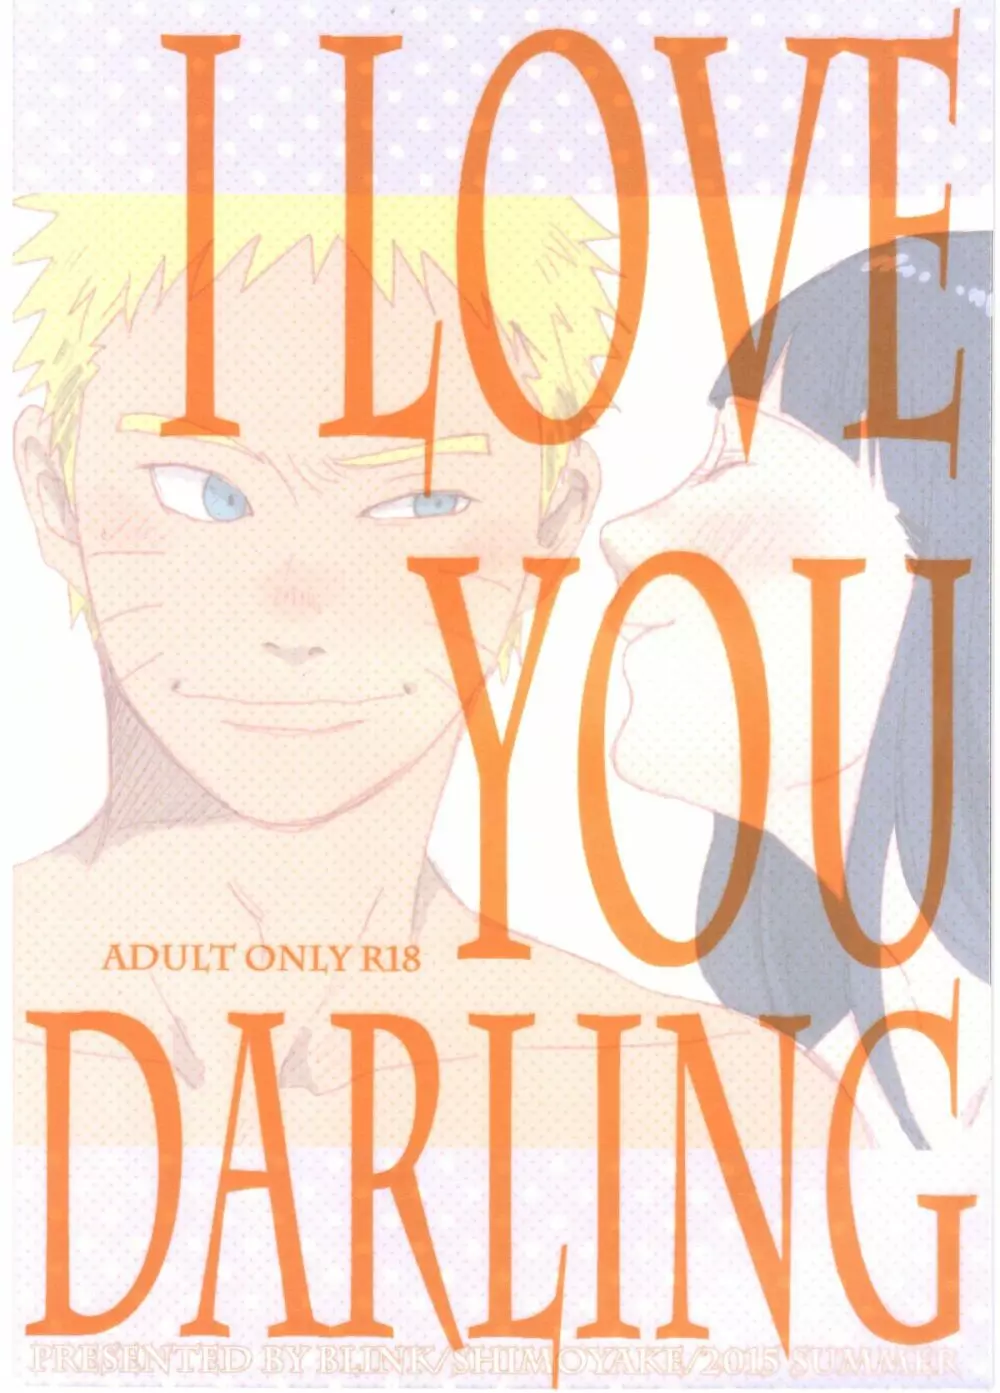 YOUR MY SWEET – I LOVE YOU DARLING 24ページ